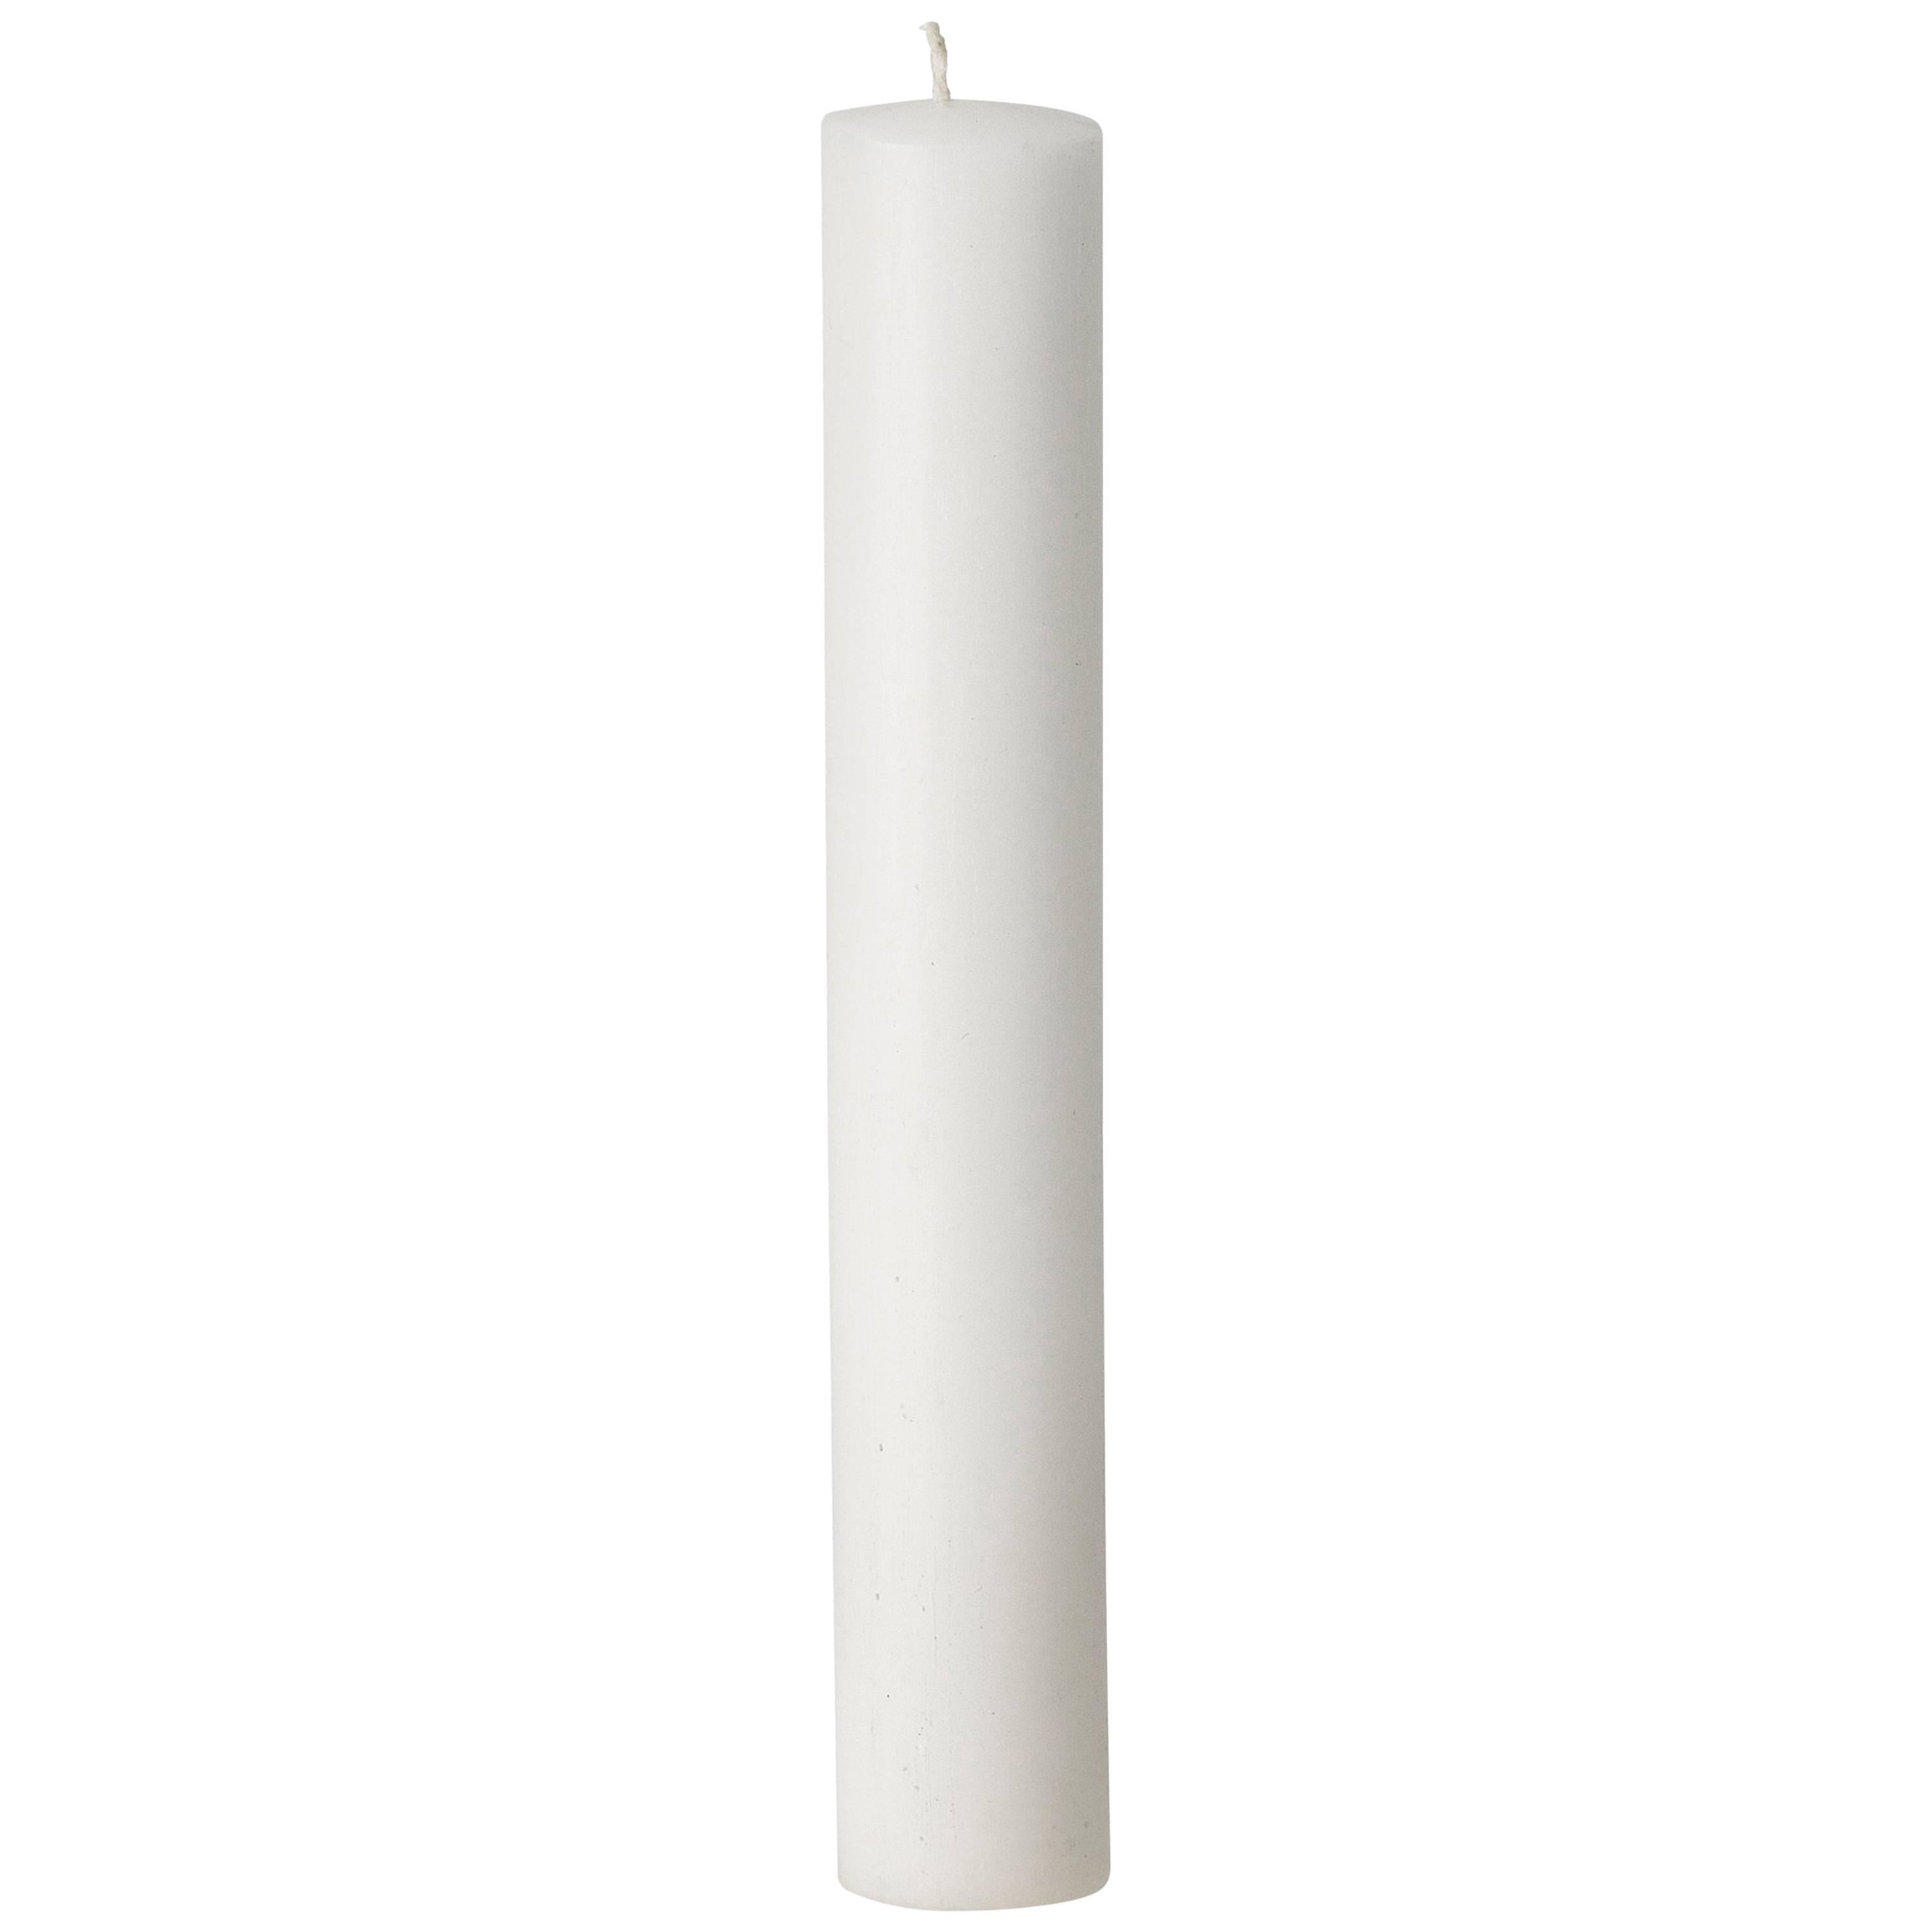 Ghidini 1961 "There" Push Pin White Candle For Sale